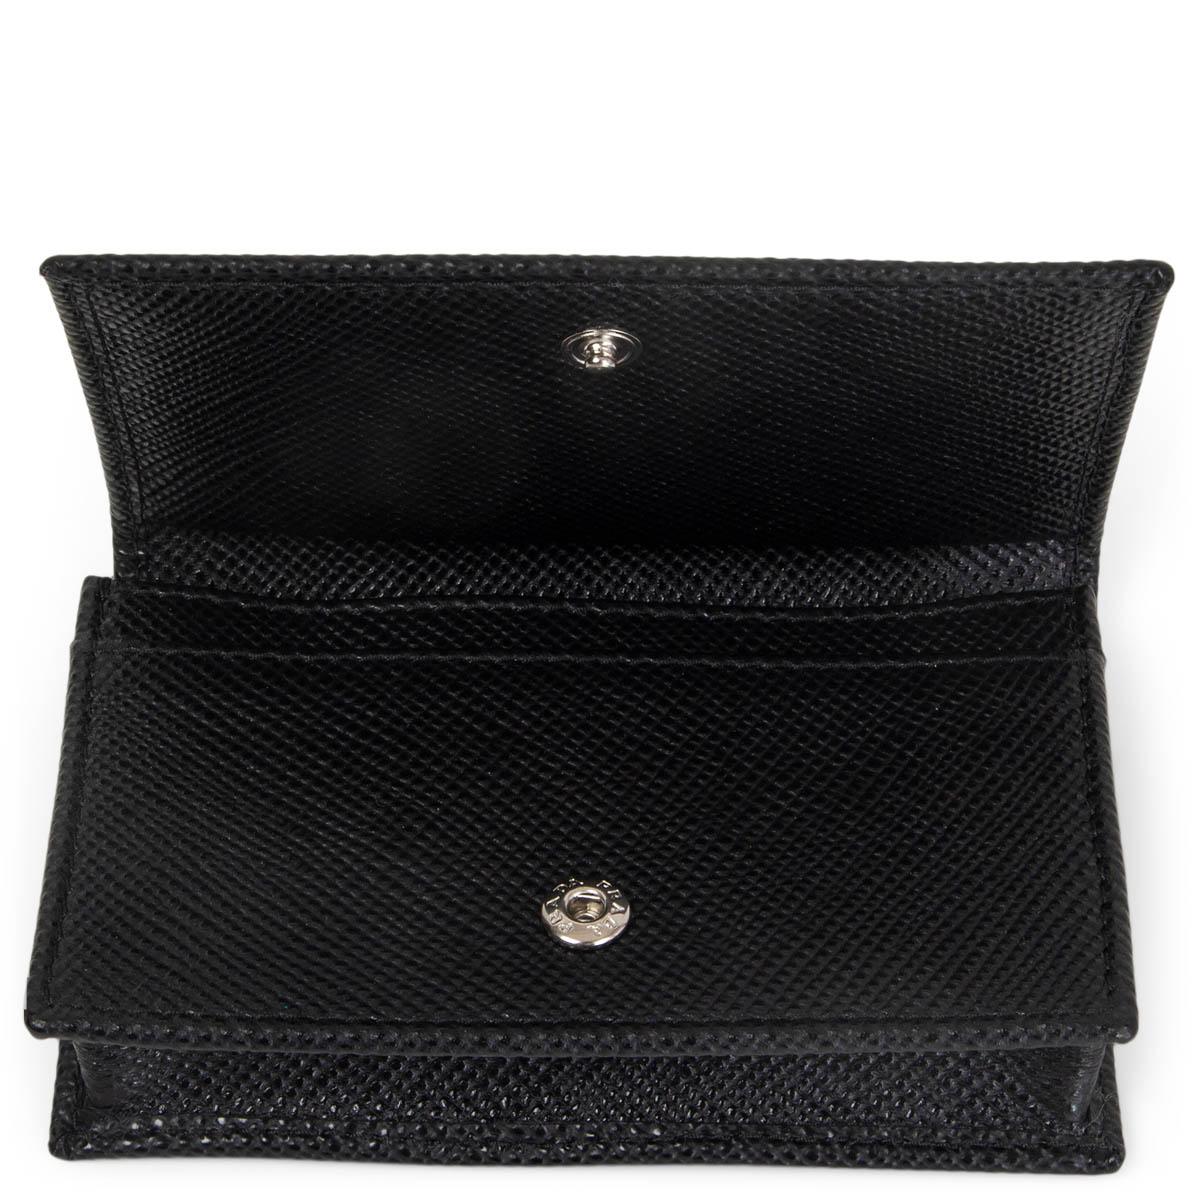 Women's or Men's PRADA black leather SAFFIANO Credit Card & Coin Wallet